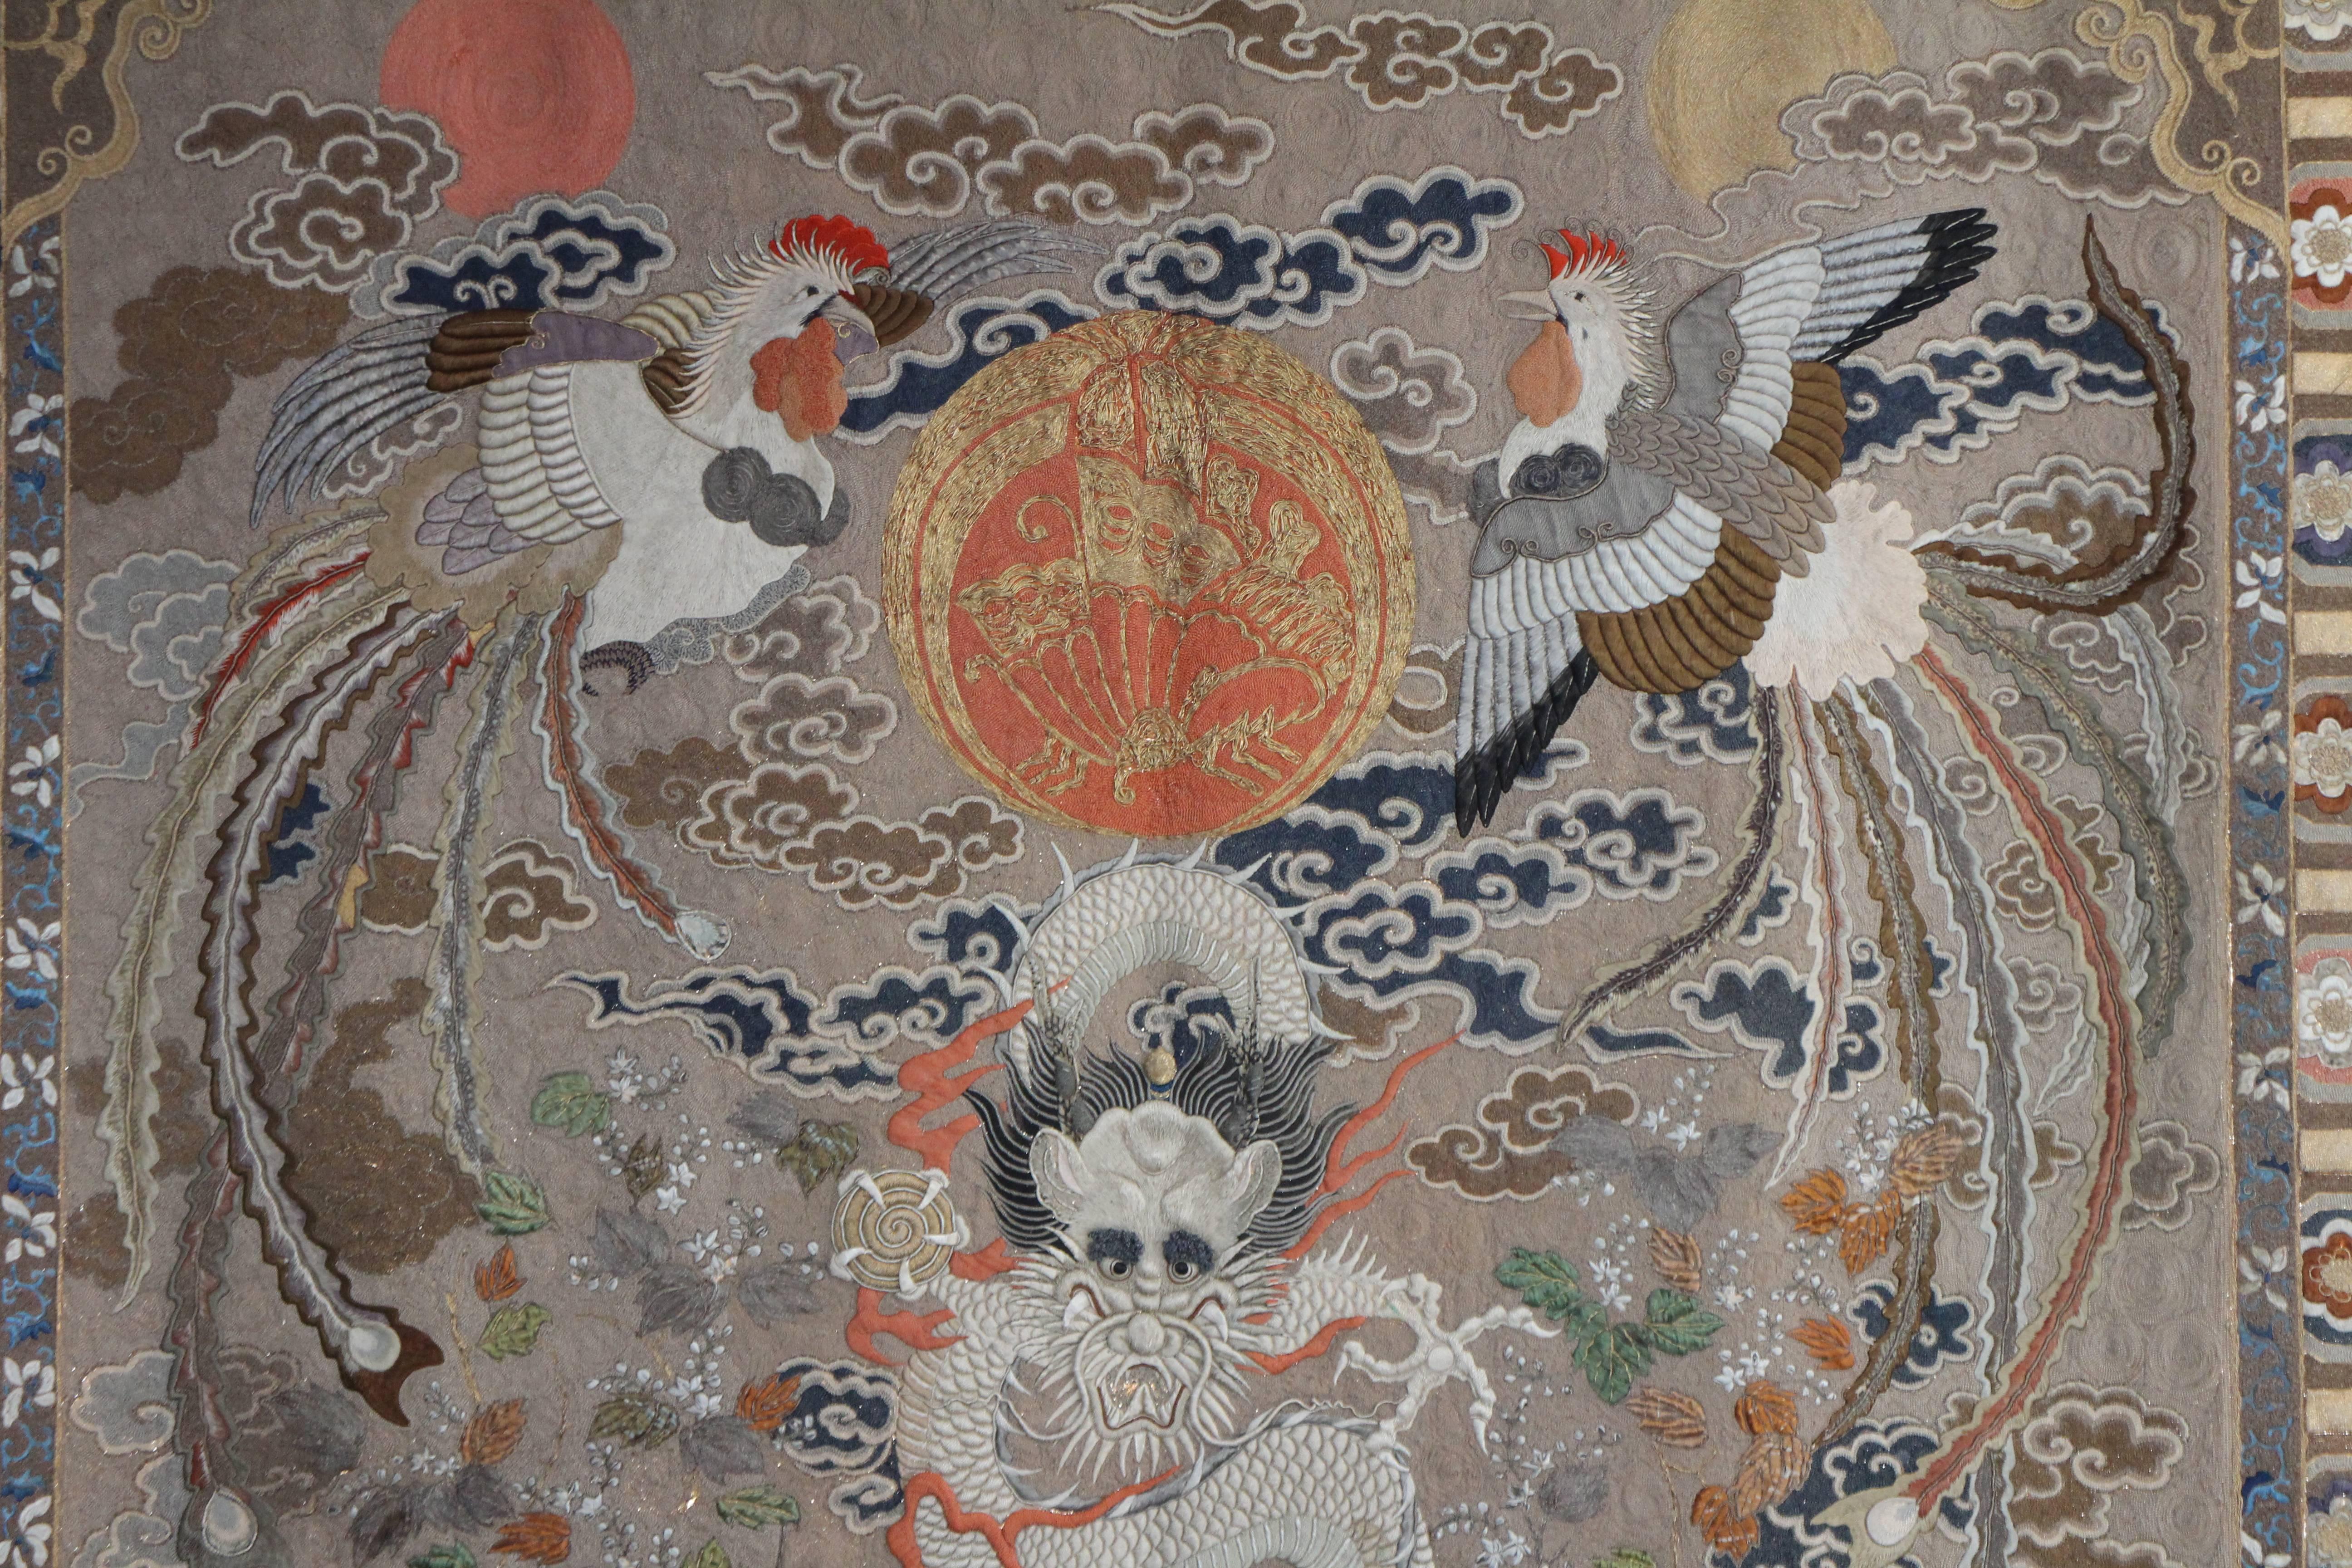 An impressive antique silk embroidery of a five toed dragon (traditionally associated with imperial China) flying over a turbulent sea and rolling hills with galloping stylised horses. Above the dragon two phoenixes flank a variation of the Taira